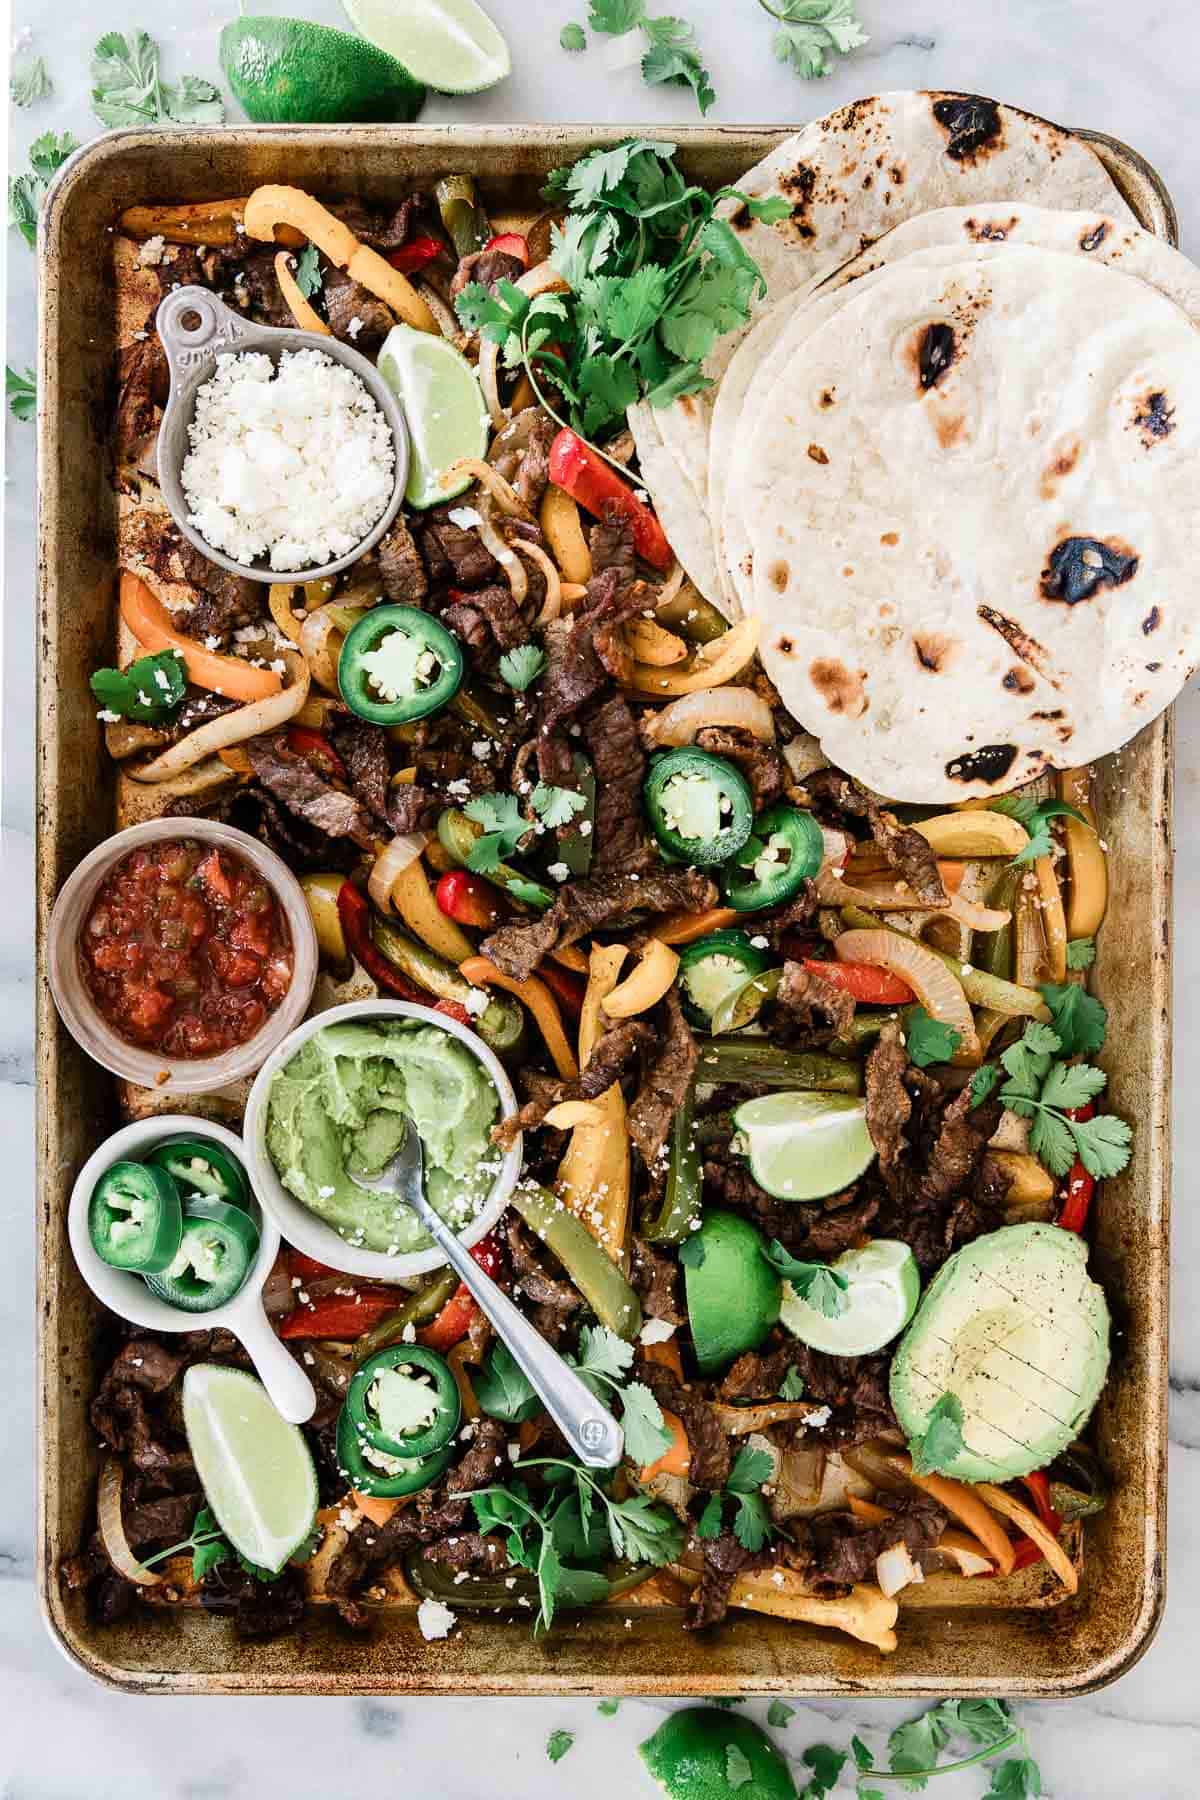 Sheet pan steak fajitas on a large pan. There are tortillas in one corner and condiments in the opposite corner.